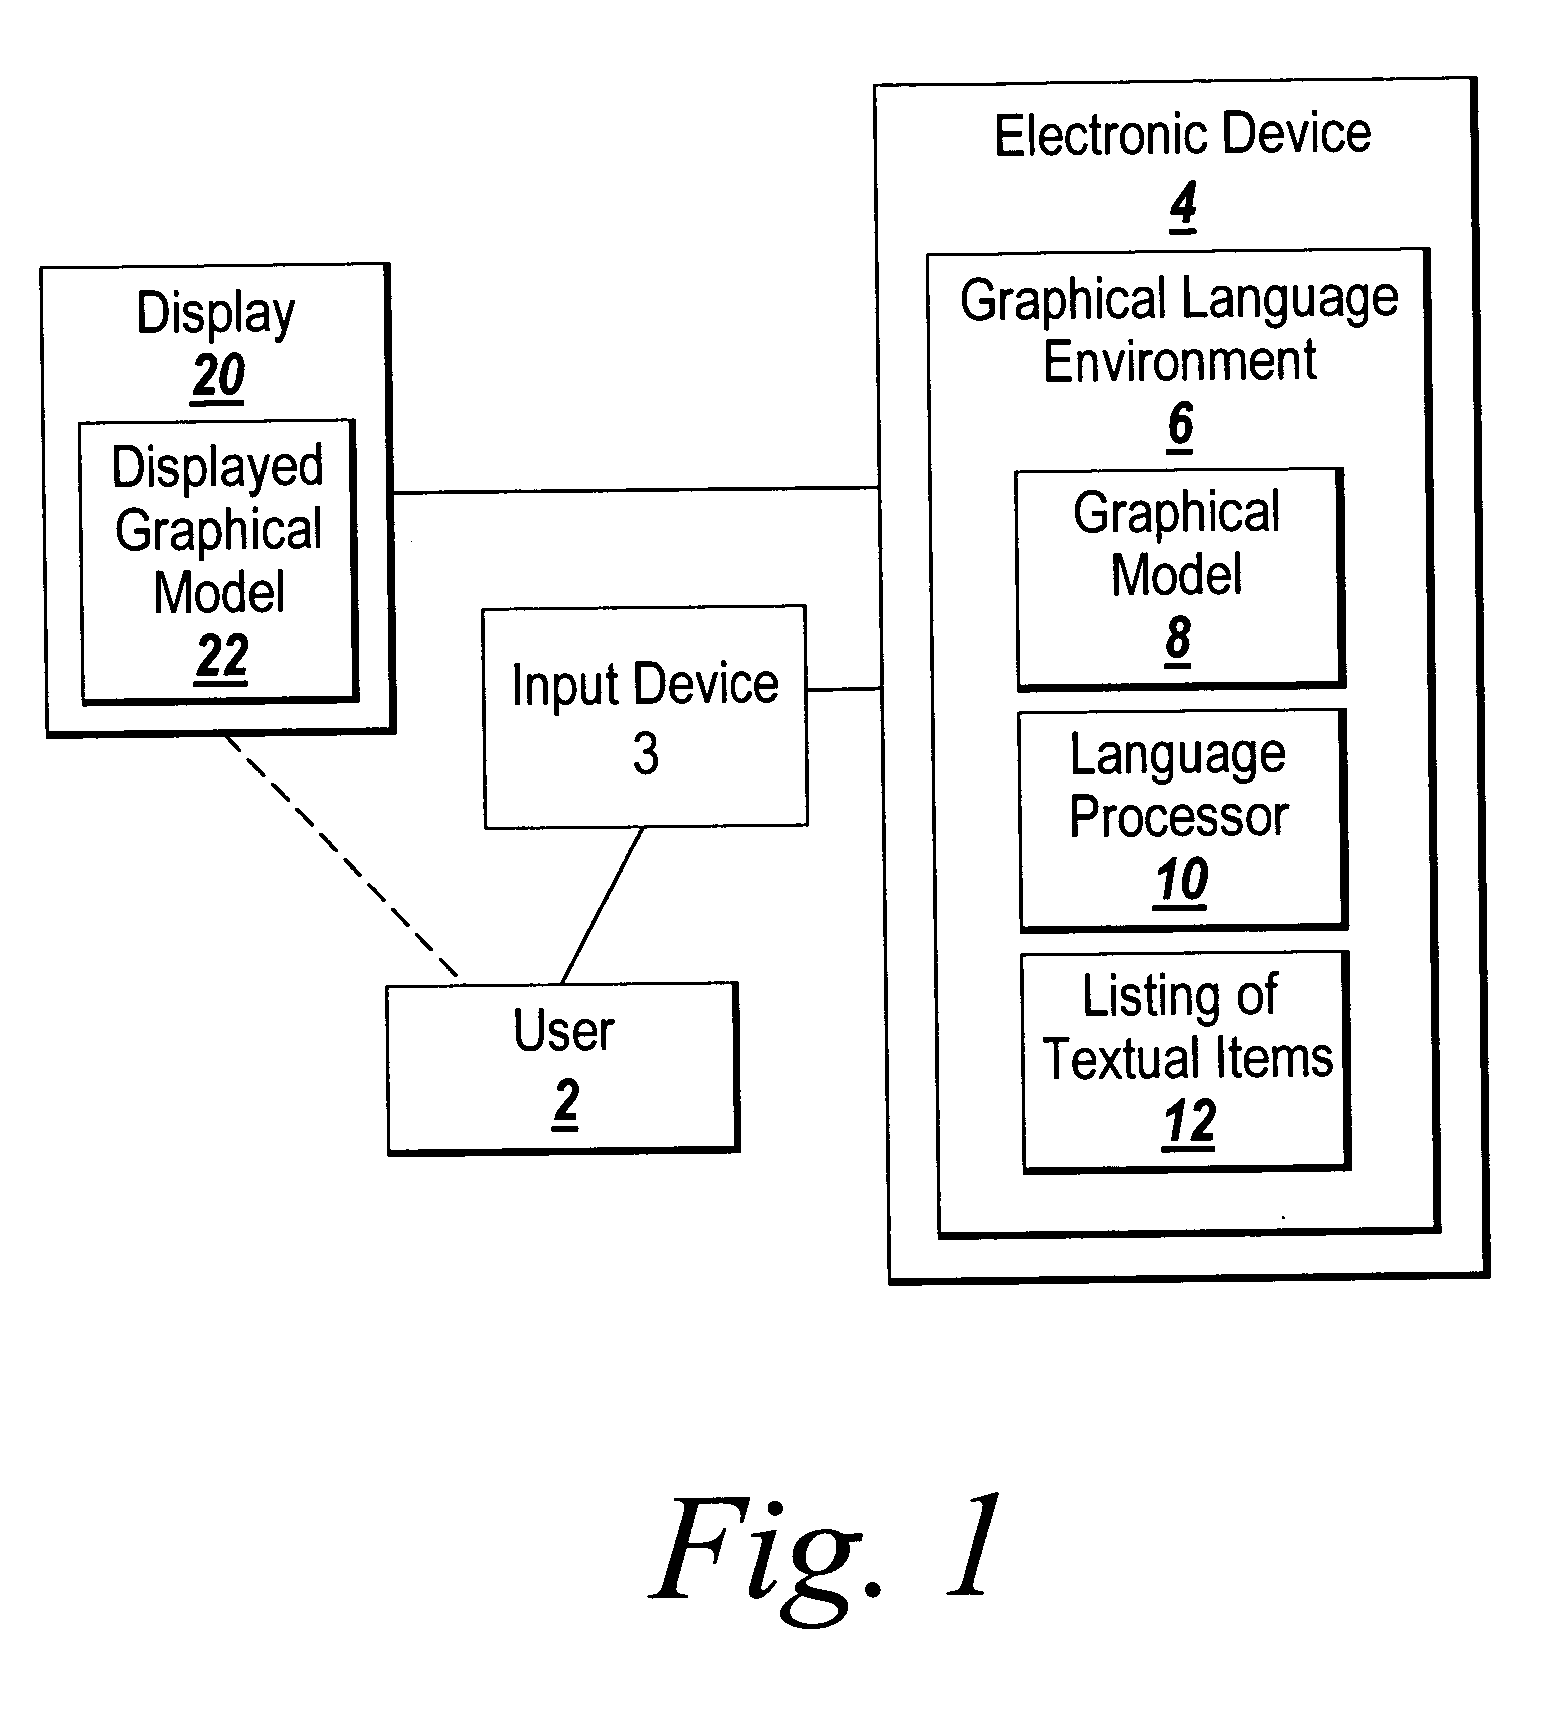 System and method for providing indicators of textual items having intrinsic executable computational meaning within a graphical language environment